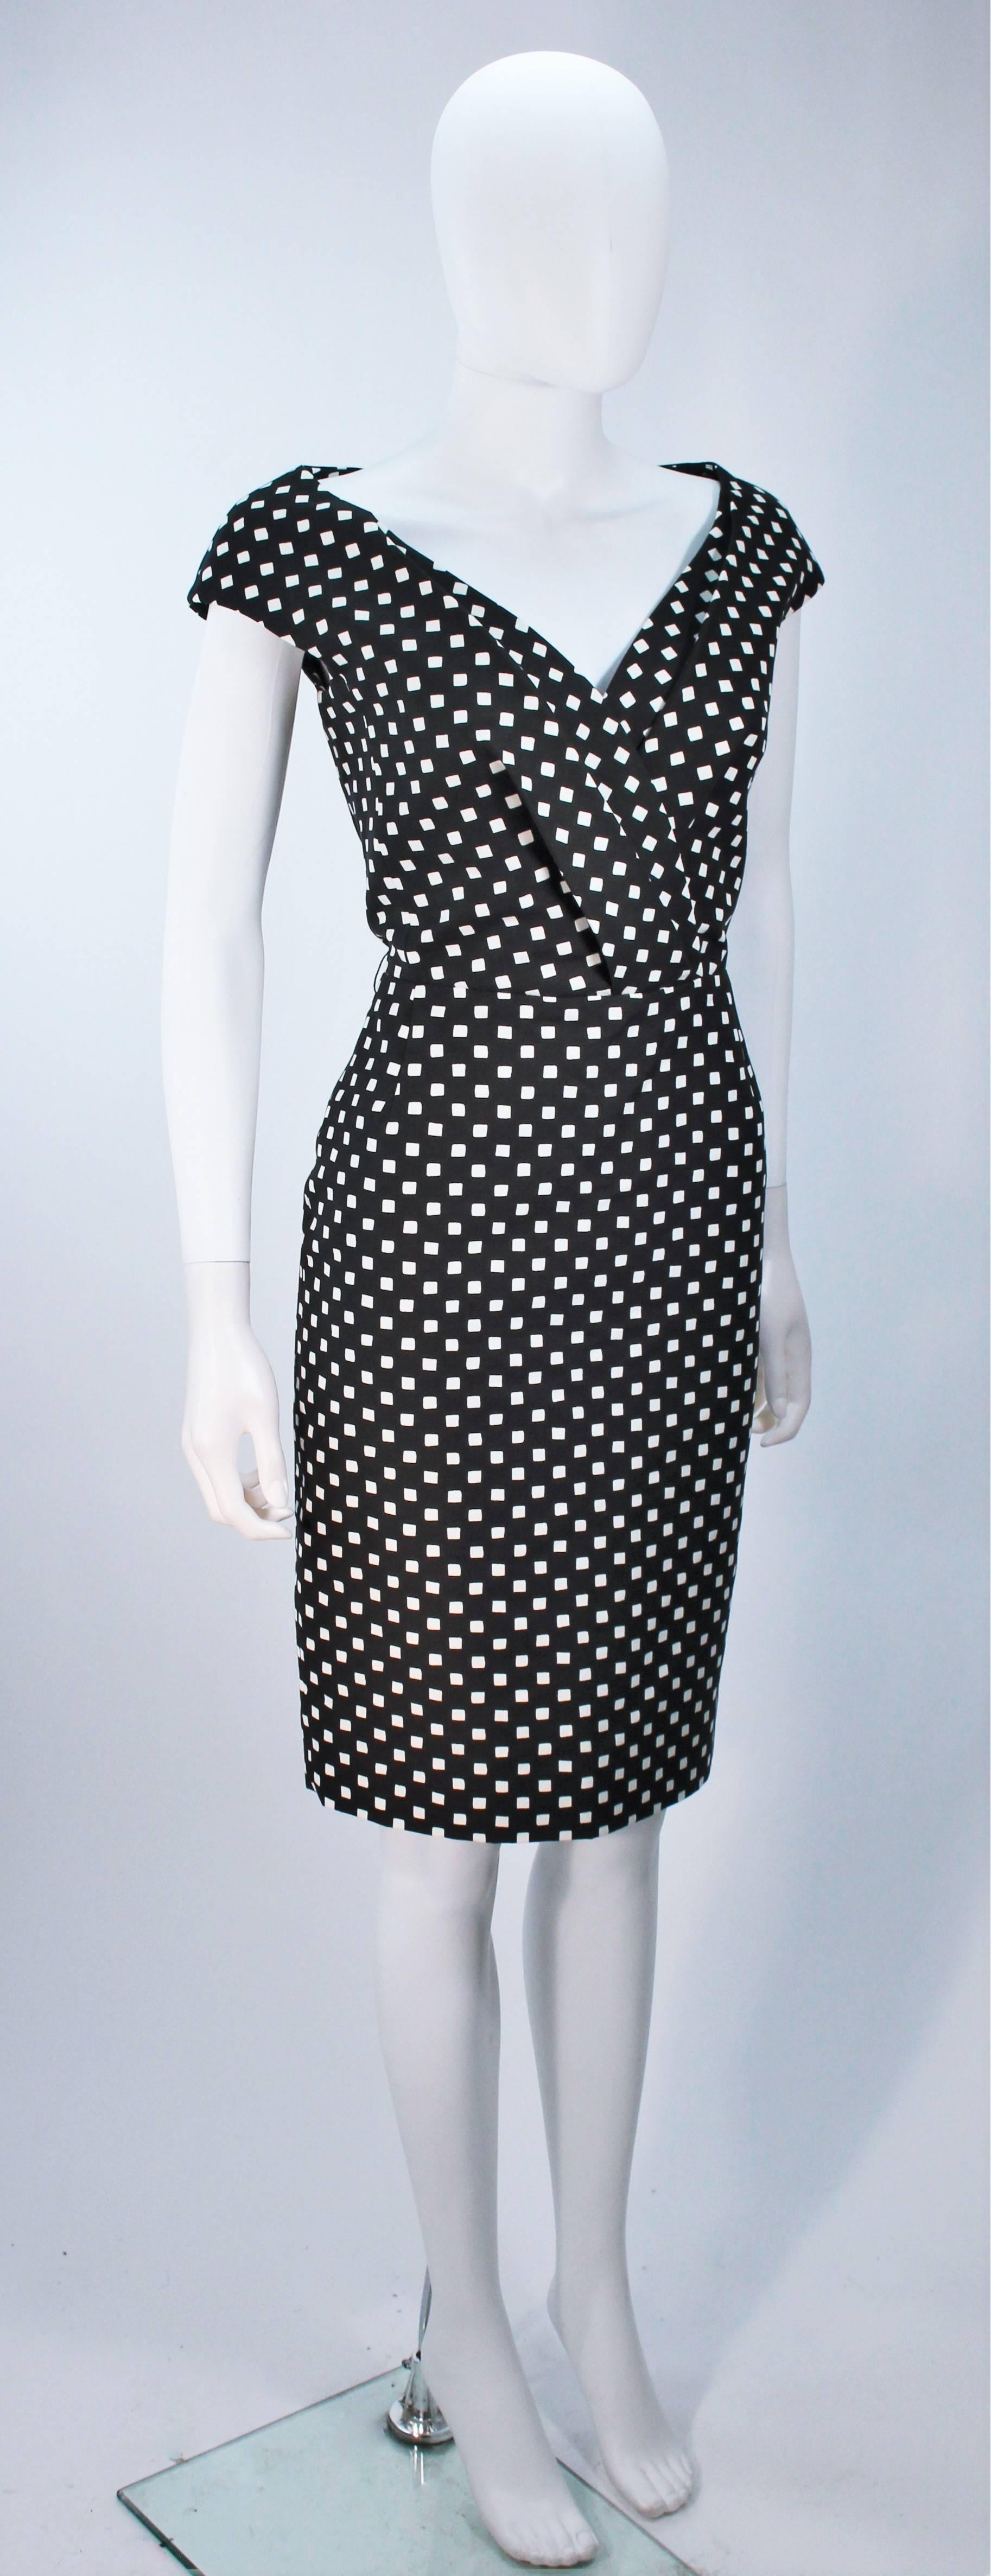 CHRISTIAN DIOR Black and White Checkered Cocktail Dress Size 42 6 1